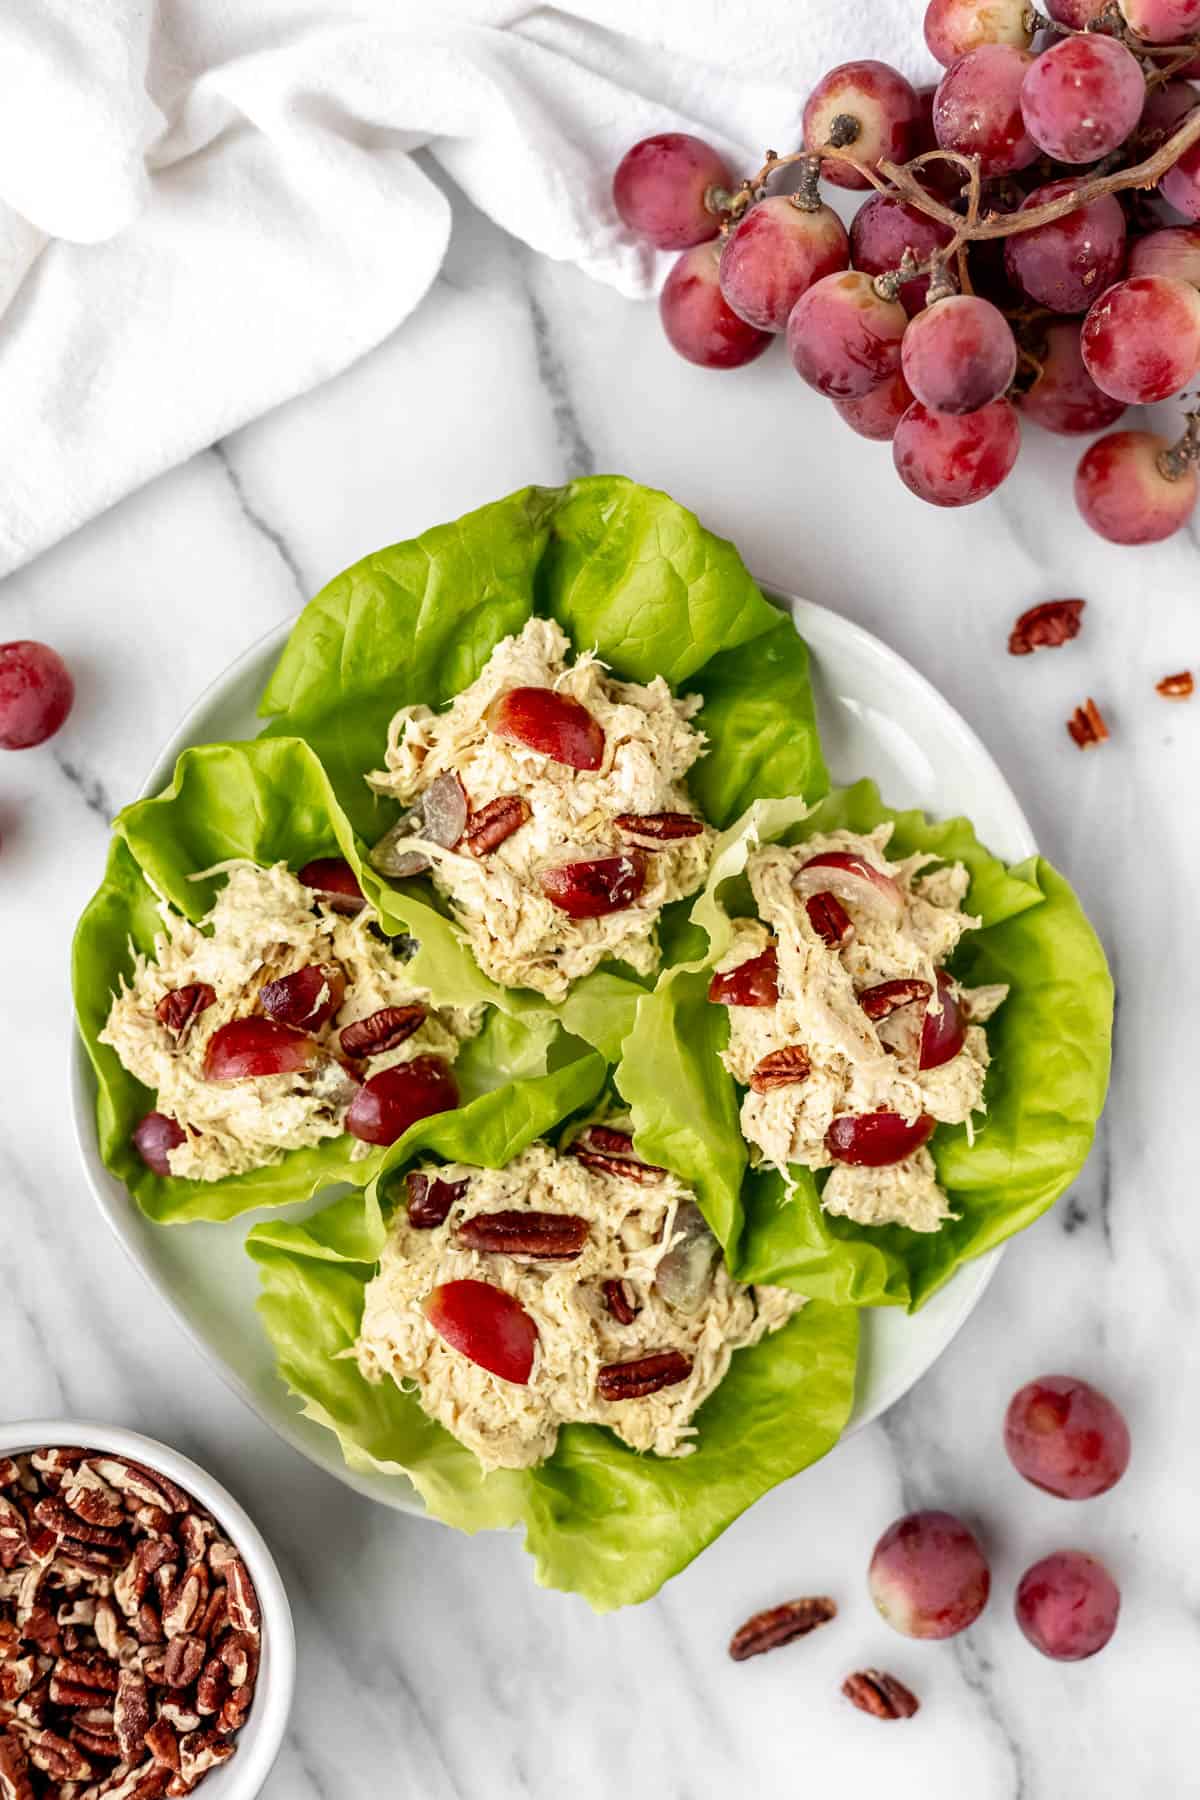 Overhead view of curry chicken salad lettuce wraps on a white plate surrounded by a bowl of pecans, grapes and a white towel.